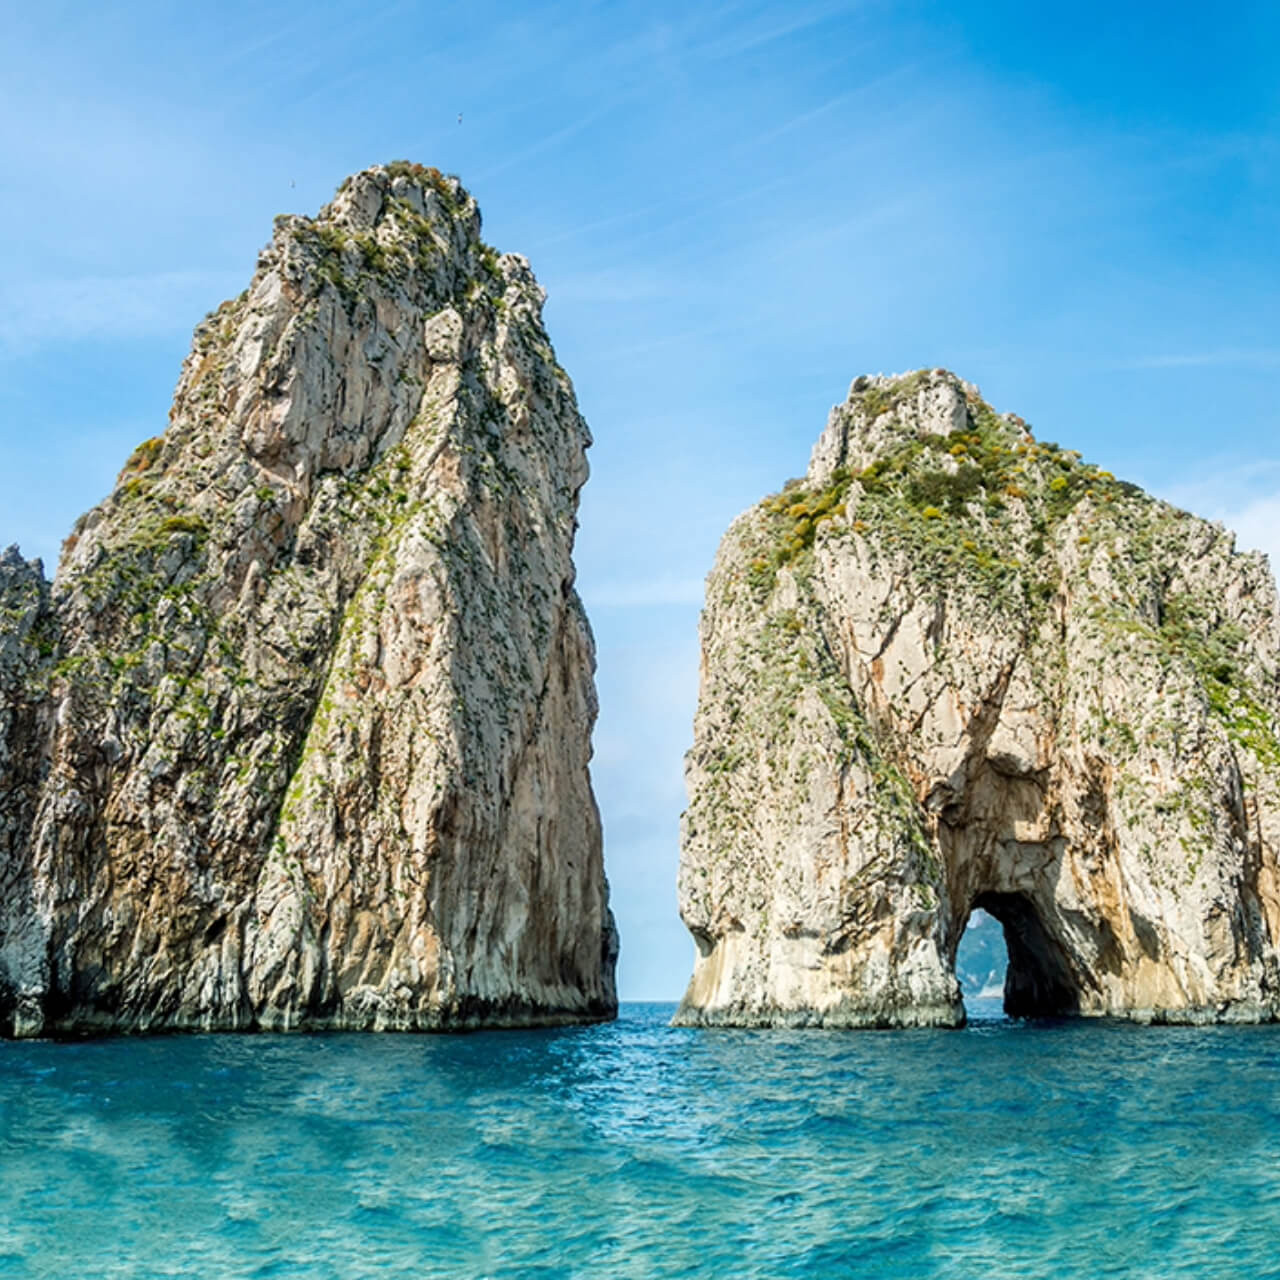 Majestic limestone cliffs of Capri with a natural arch over the azure waters of the Mediterranean Sea, under a bright blue sky.